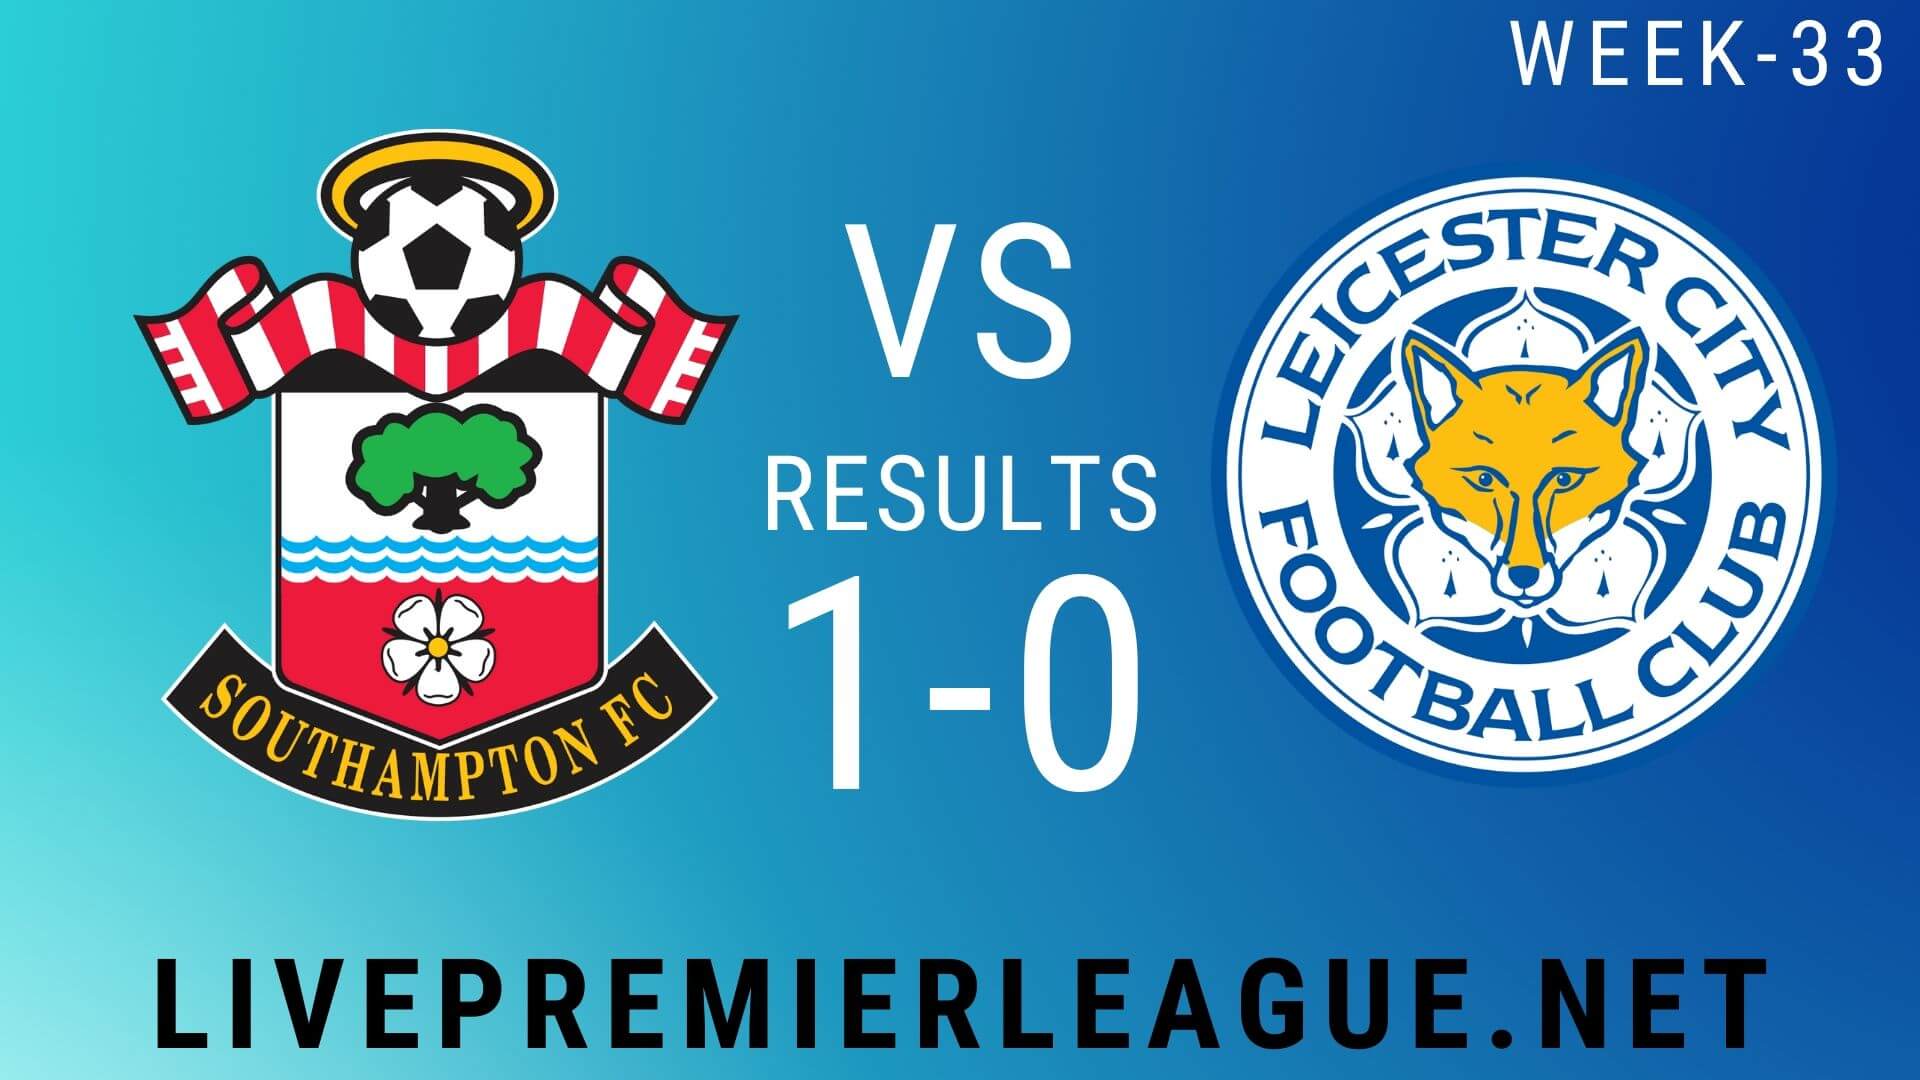 Southampton Vs Manchester City | Week 33 Result 2020